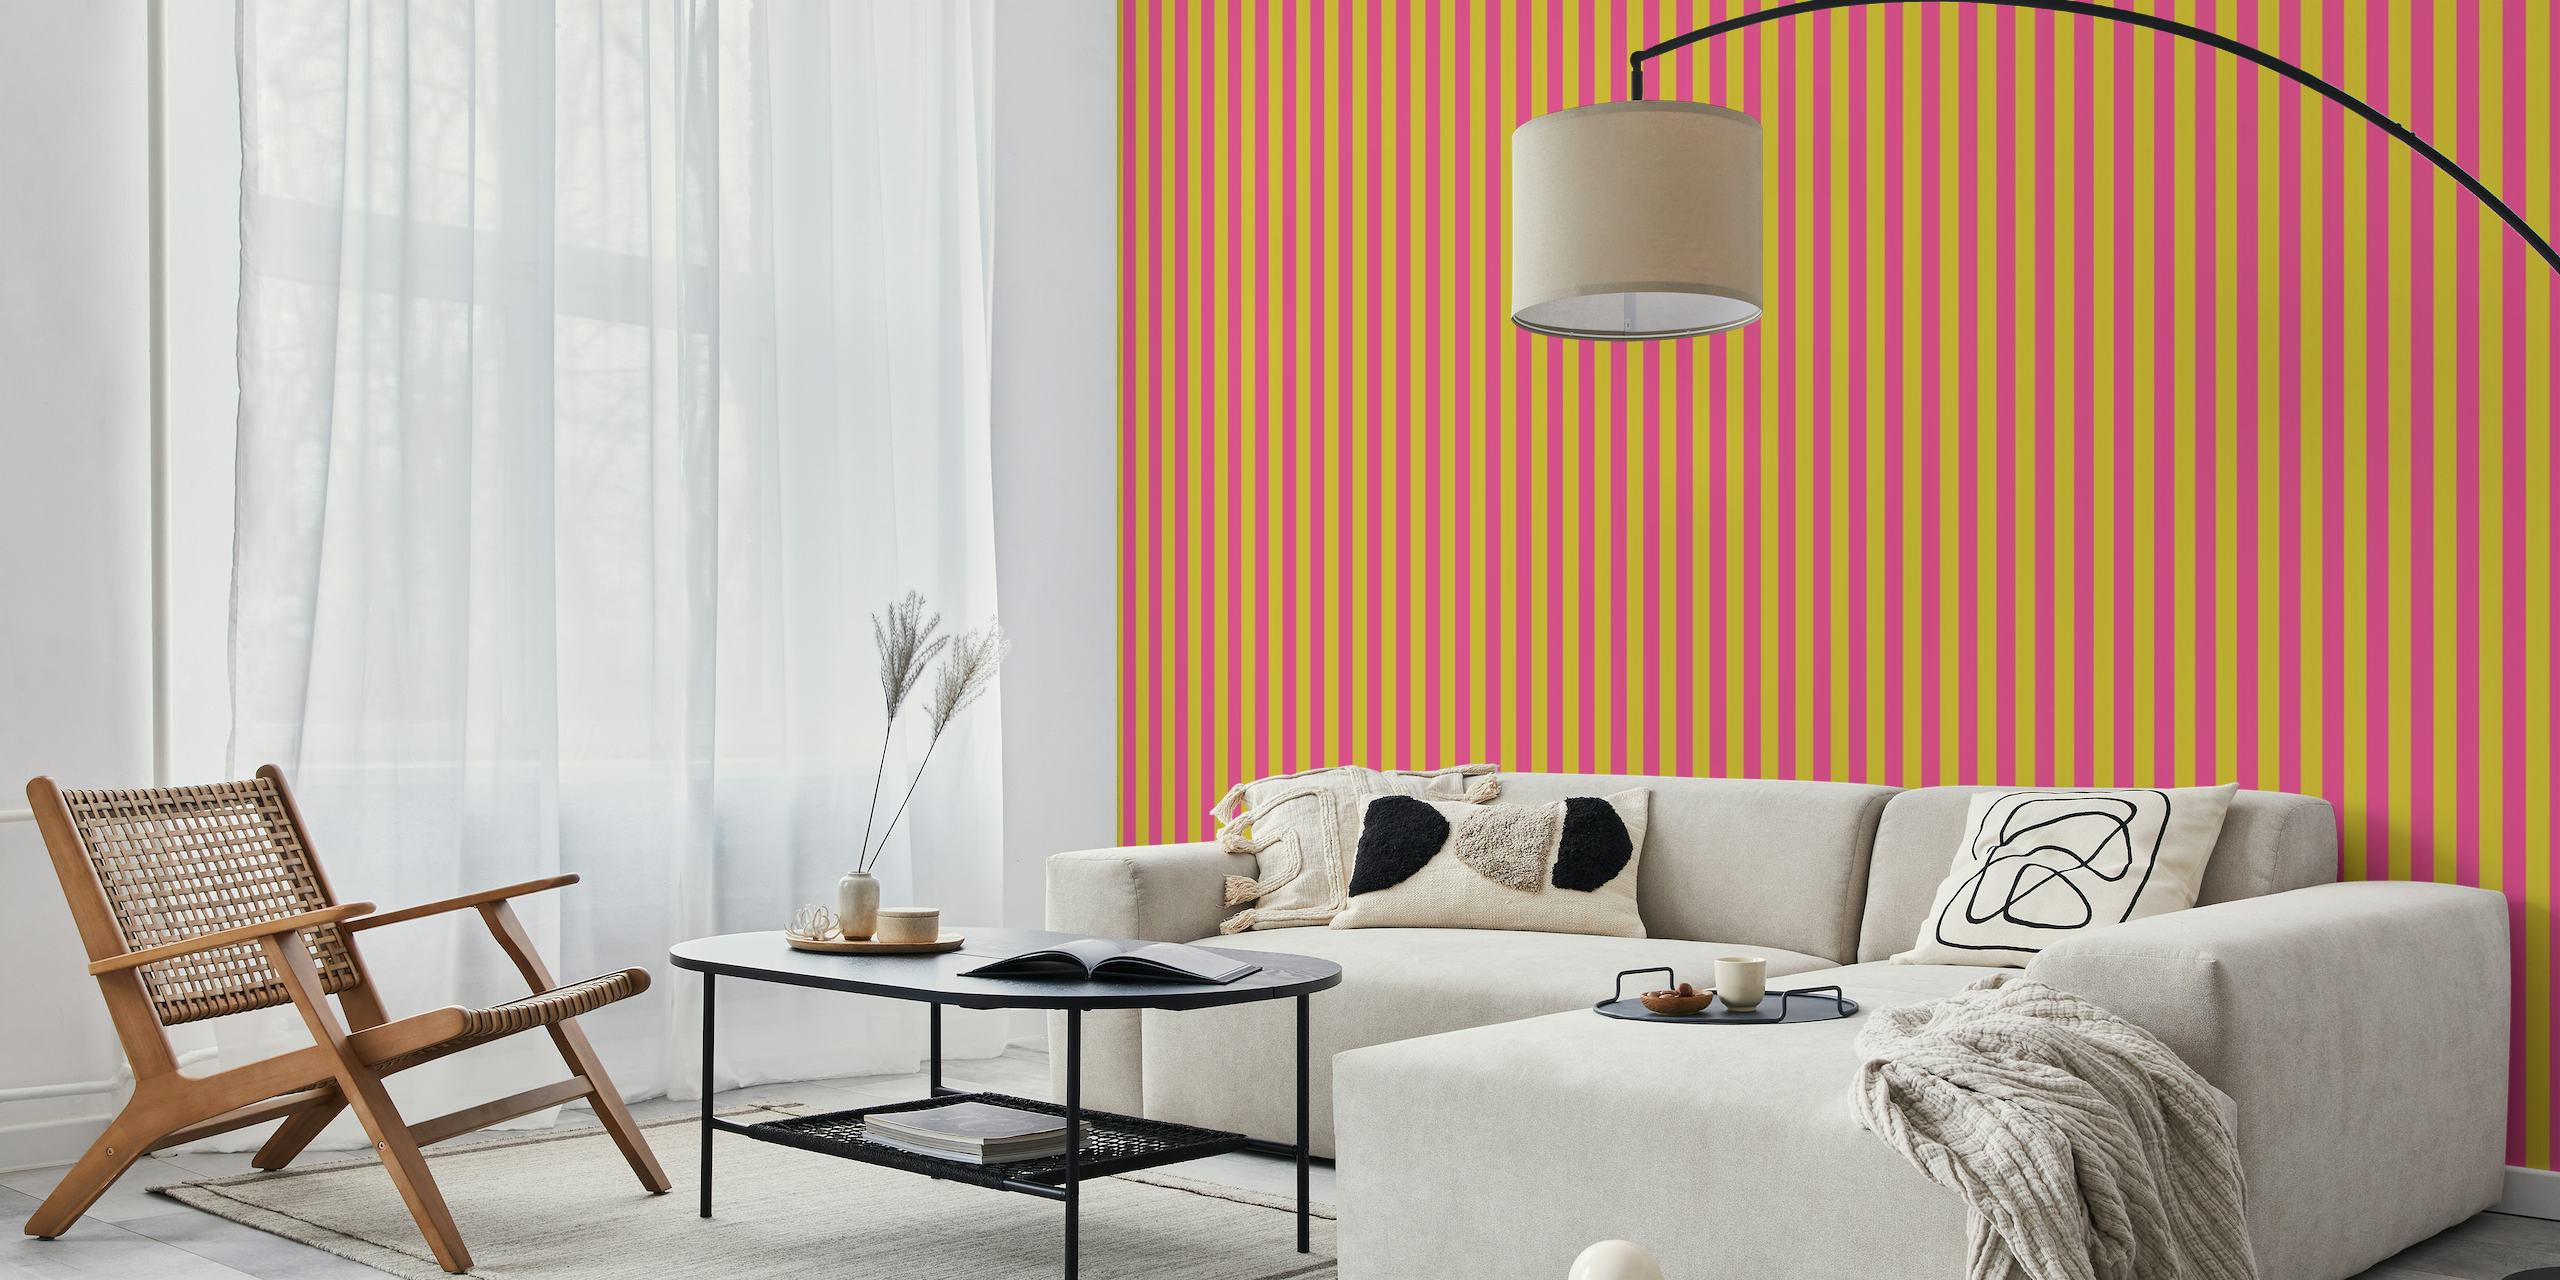 70s striped wall mural in empire yellow and hot pink